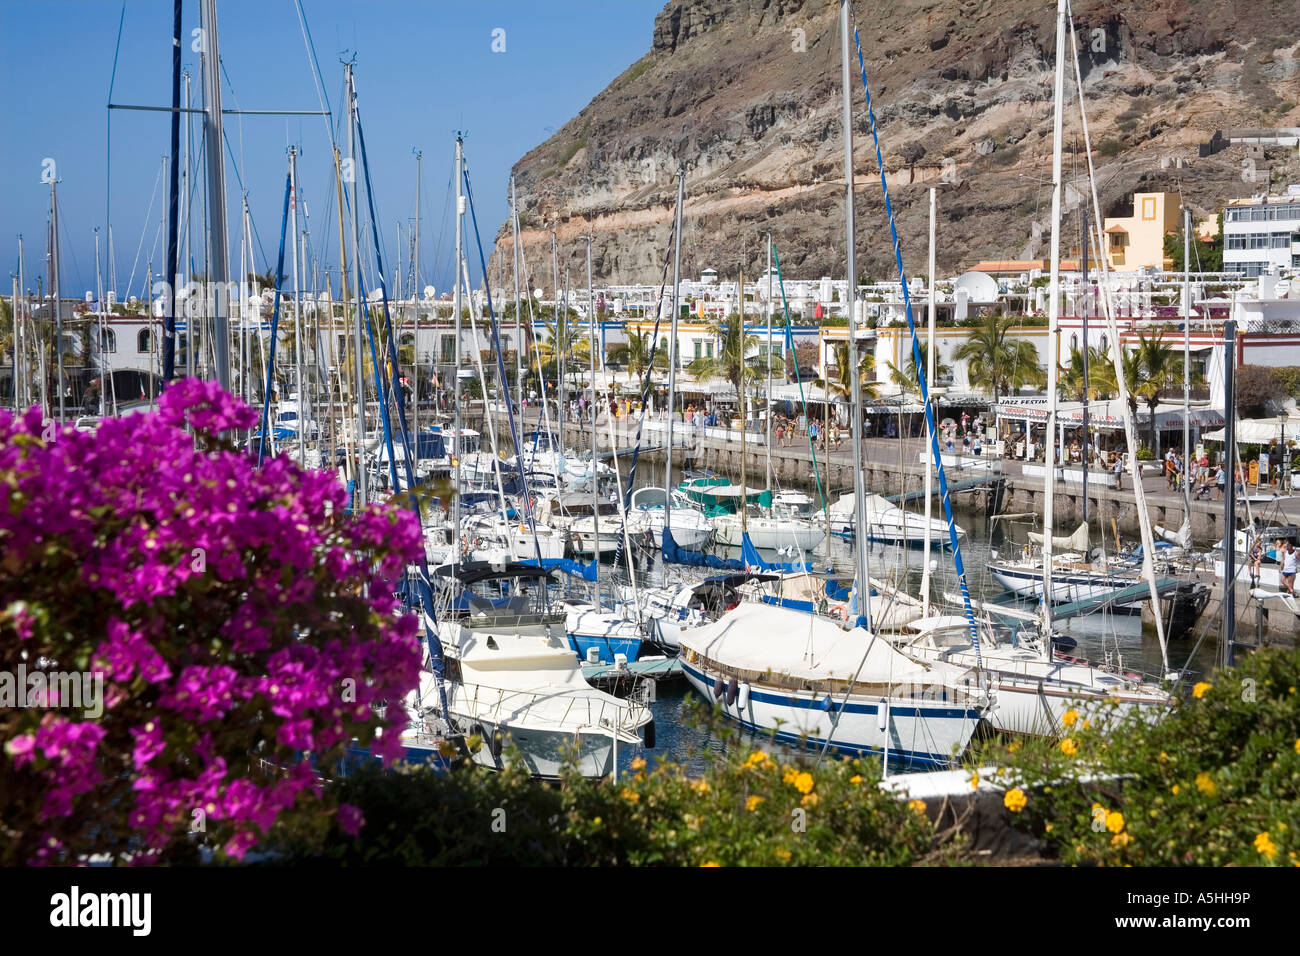 Picturesque and colourful Puerto De Mogan in Gran Canaria in the Canary Islands Stock Photo